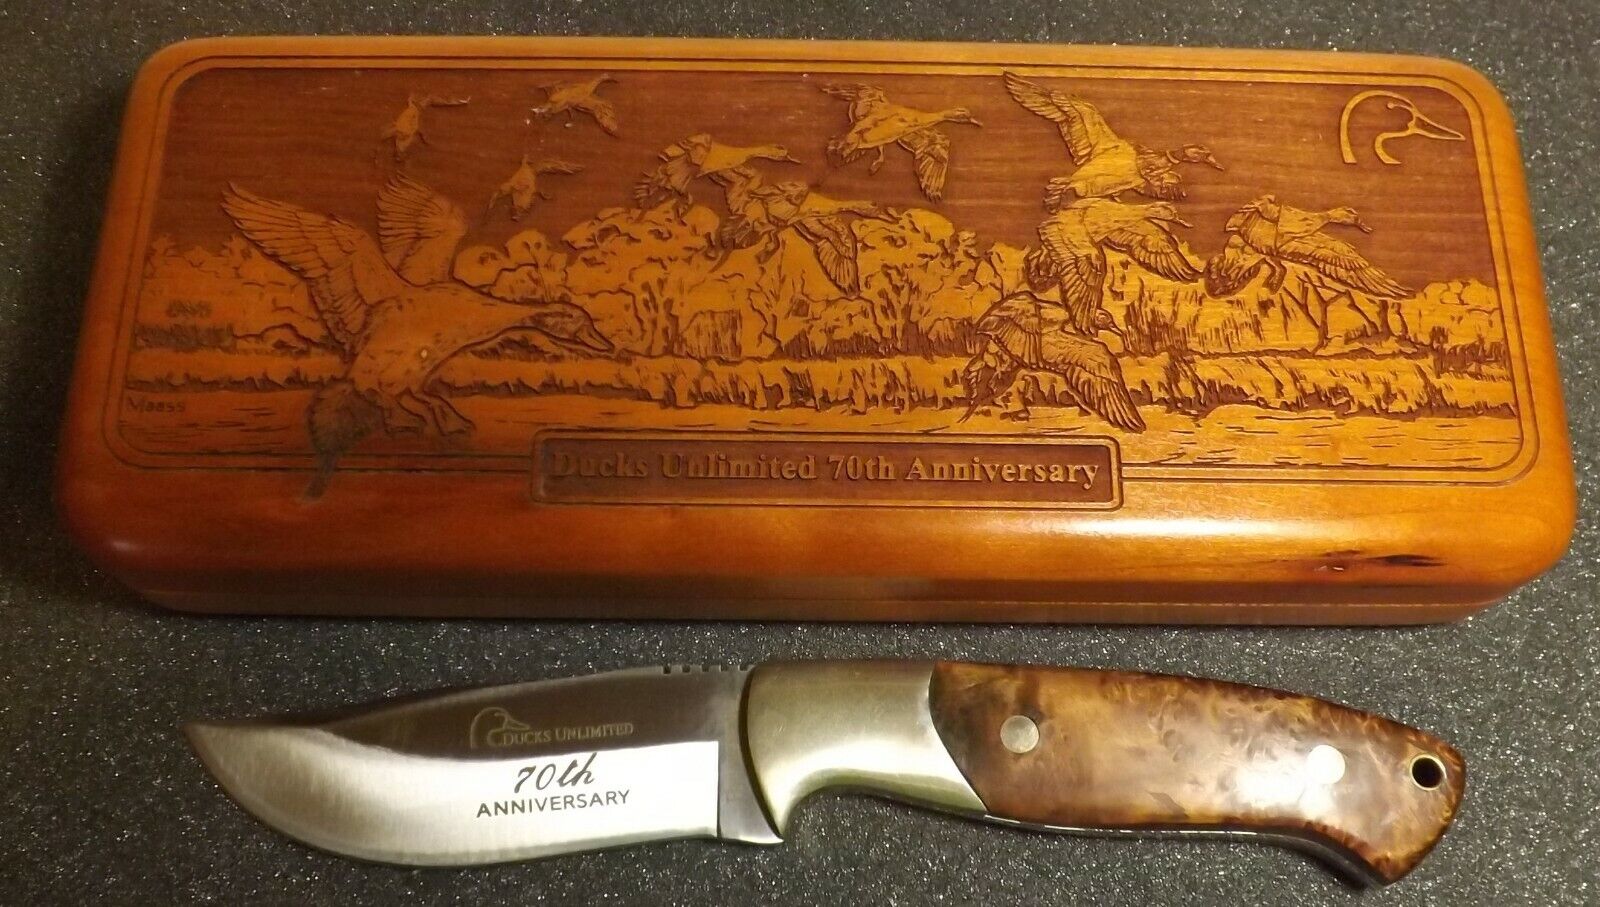 Ducks Unlimited Knife 70th Anniversary 2007 Knife of the Year Browning  